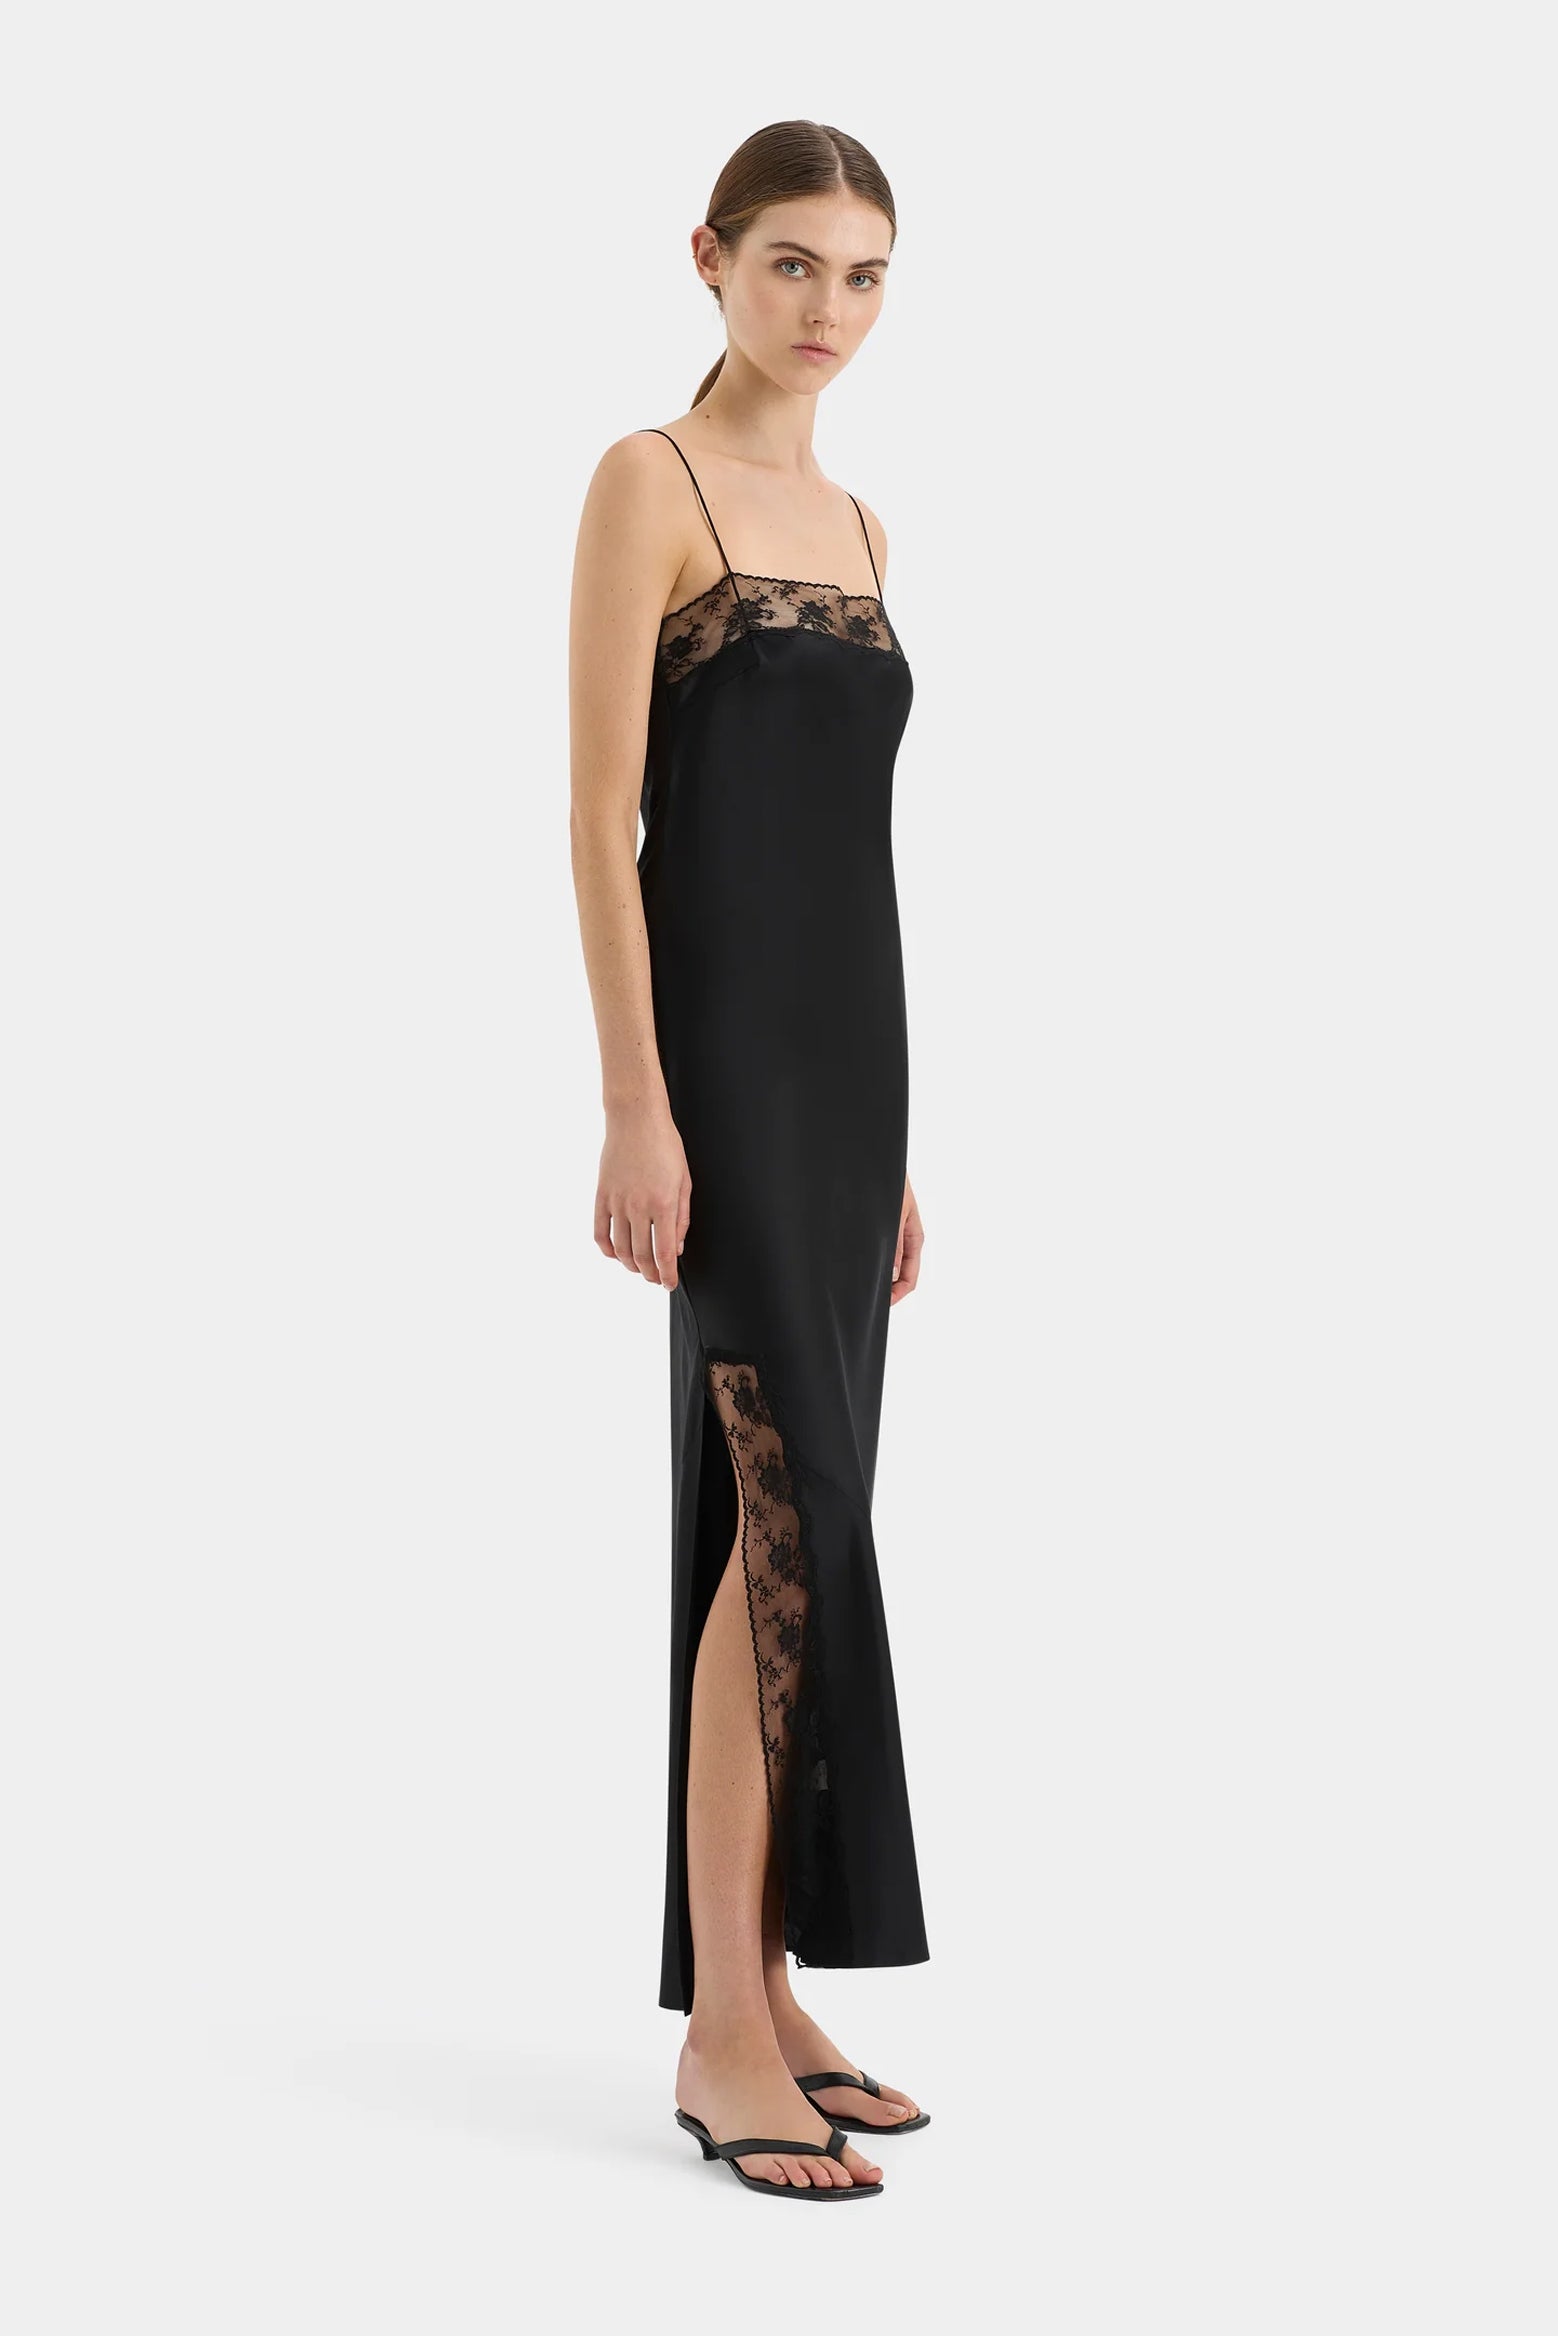 SIR Aries Lace Slip Dress in Black available at The New Trend Australia.